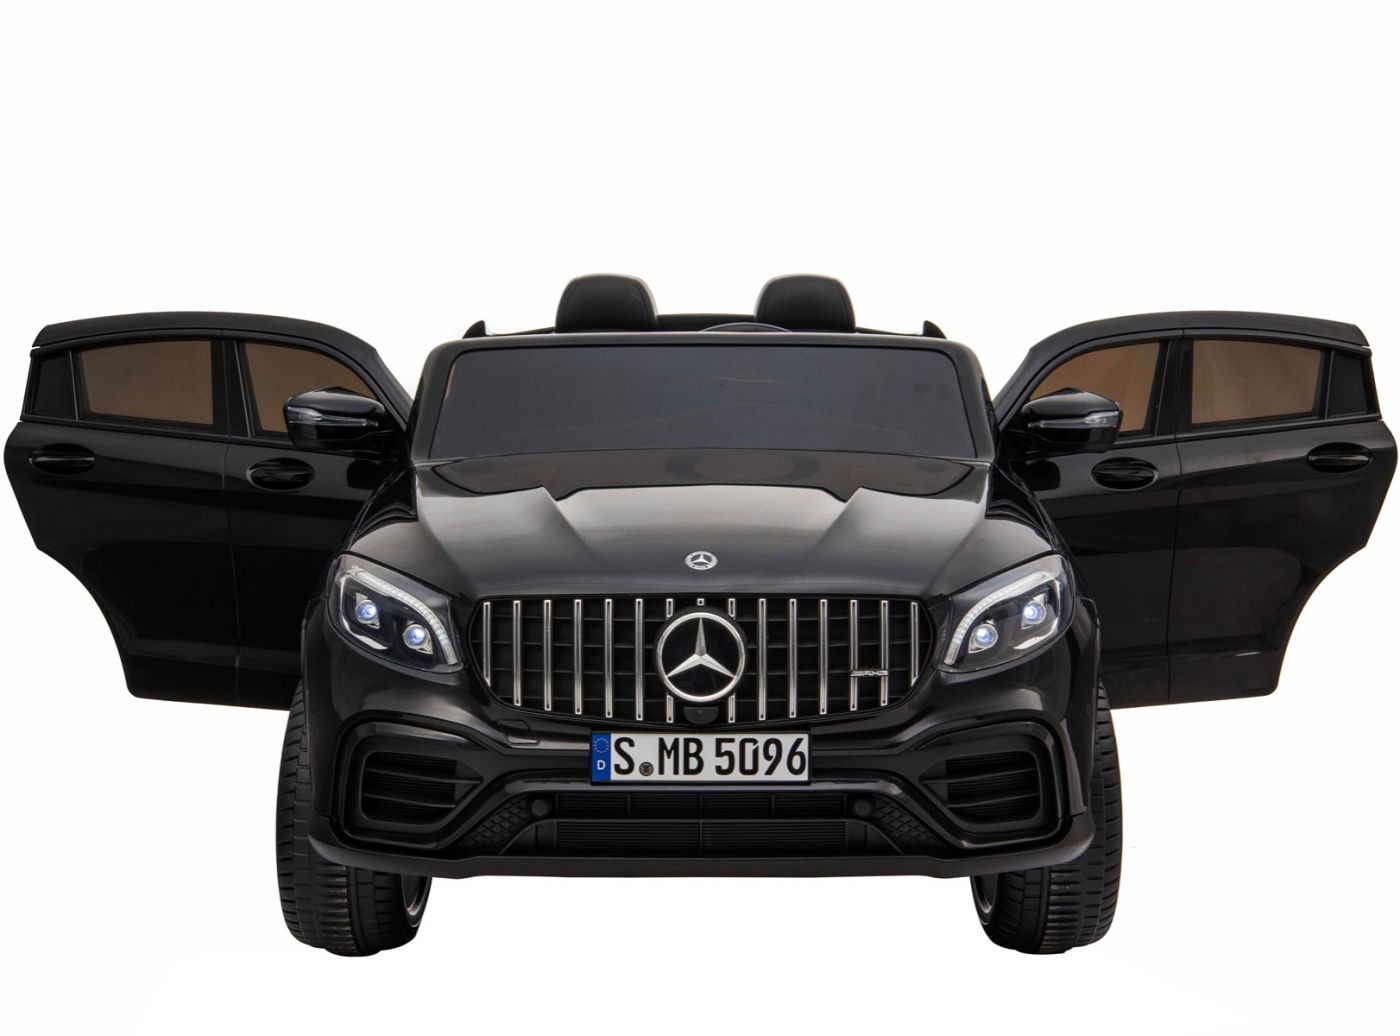 Black Mercedes AMG GLC63 S Coupe 2 Seater Kids Electric Ride On Car with open doors on white background